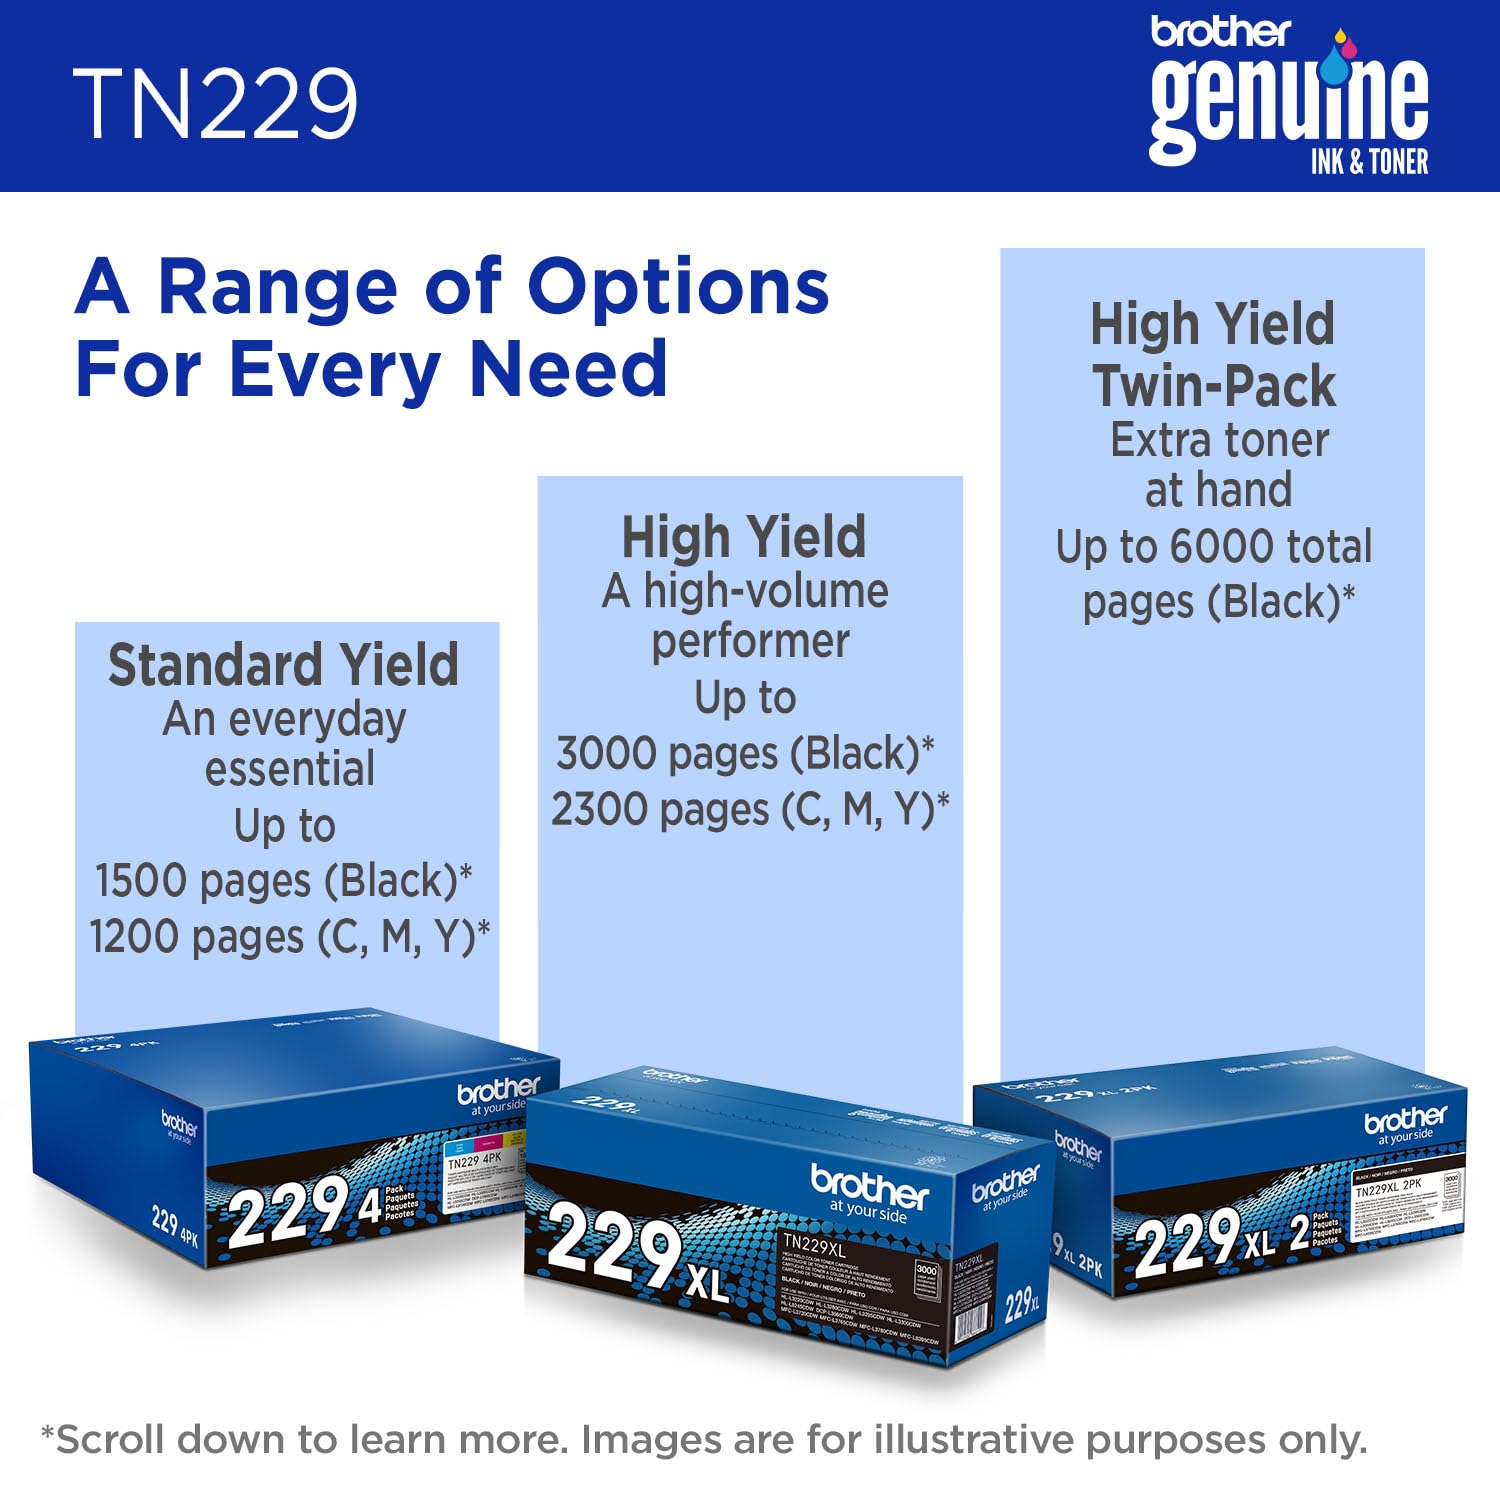 Brother Genuine TN229M Magenta Standard Yield Printer Toner Cartridge - Print up to 1,200 Pages(1)